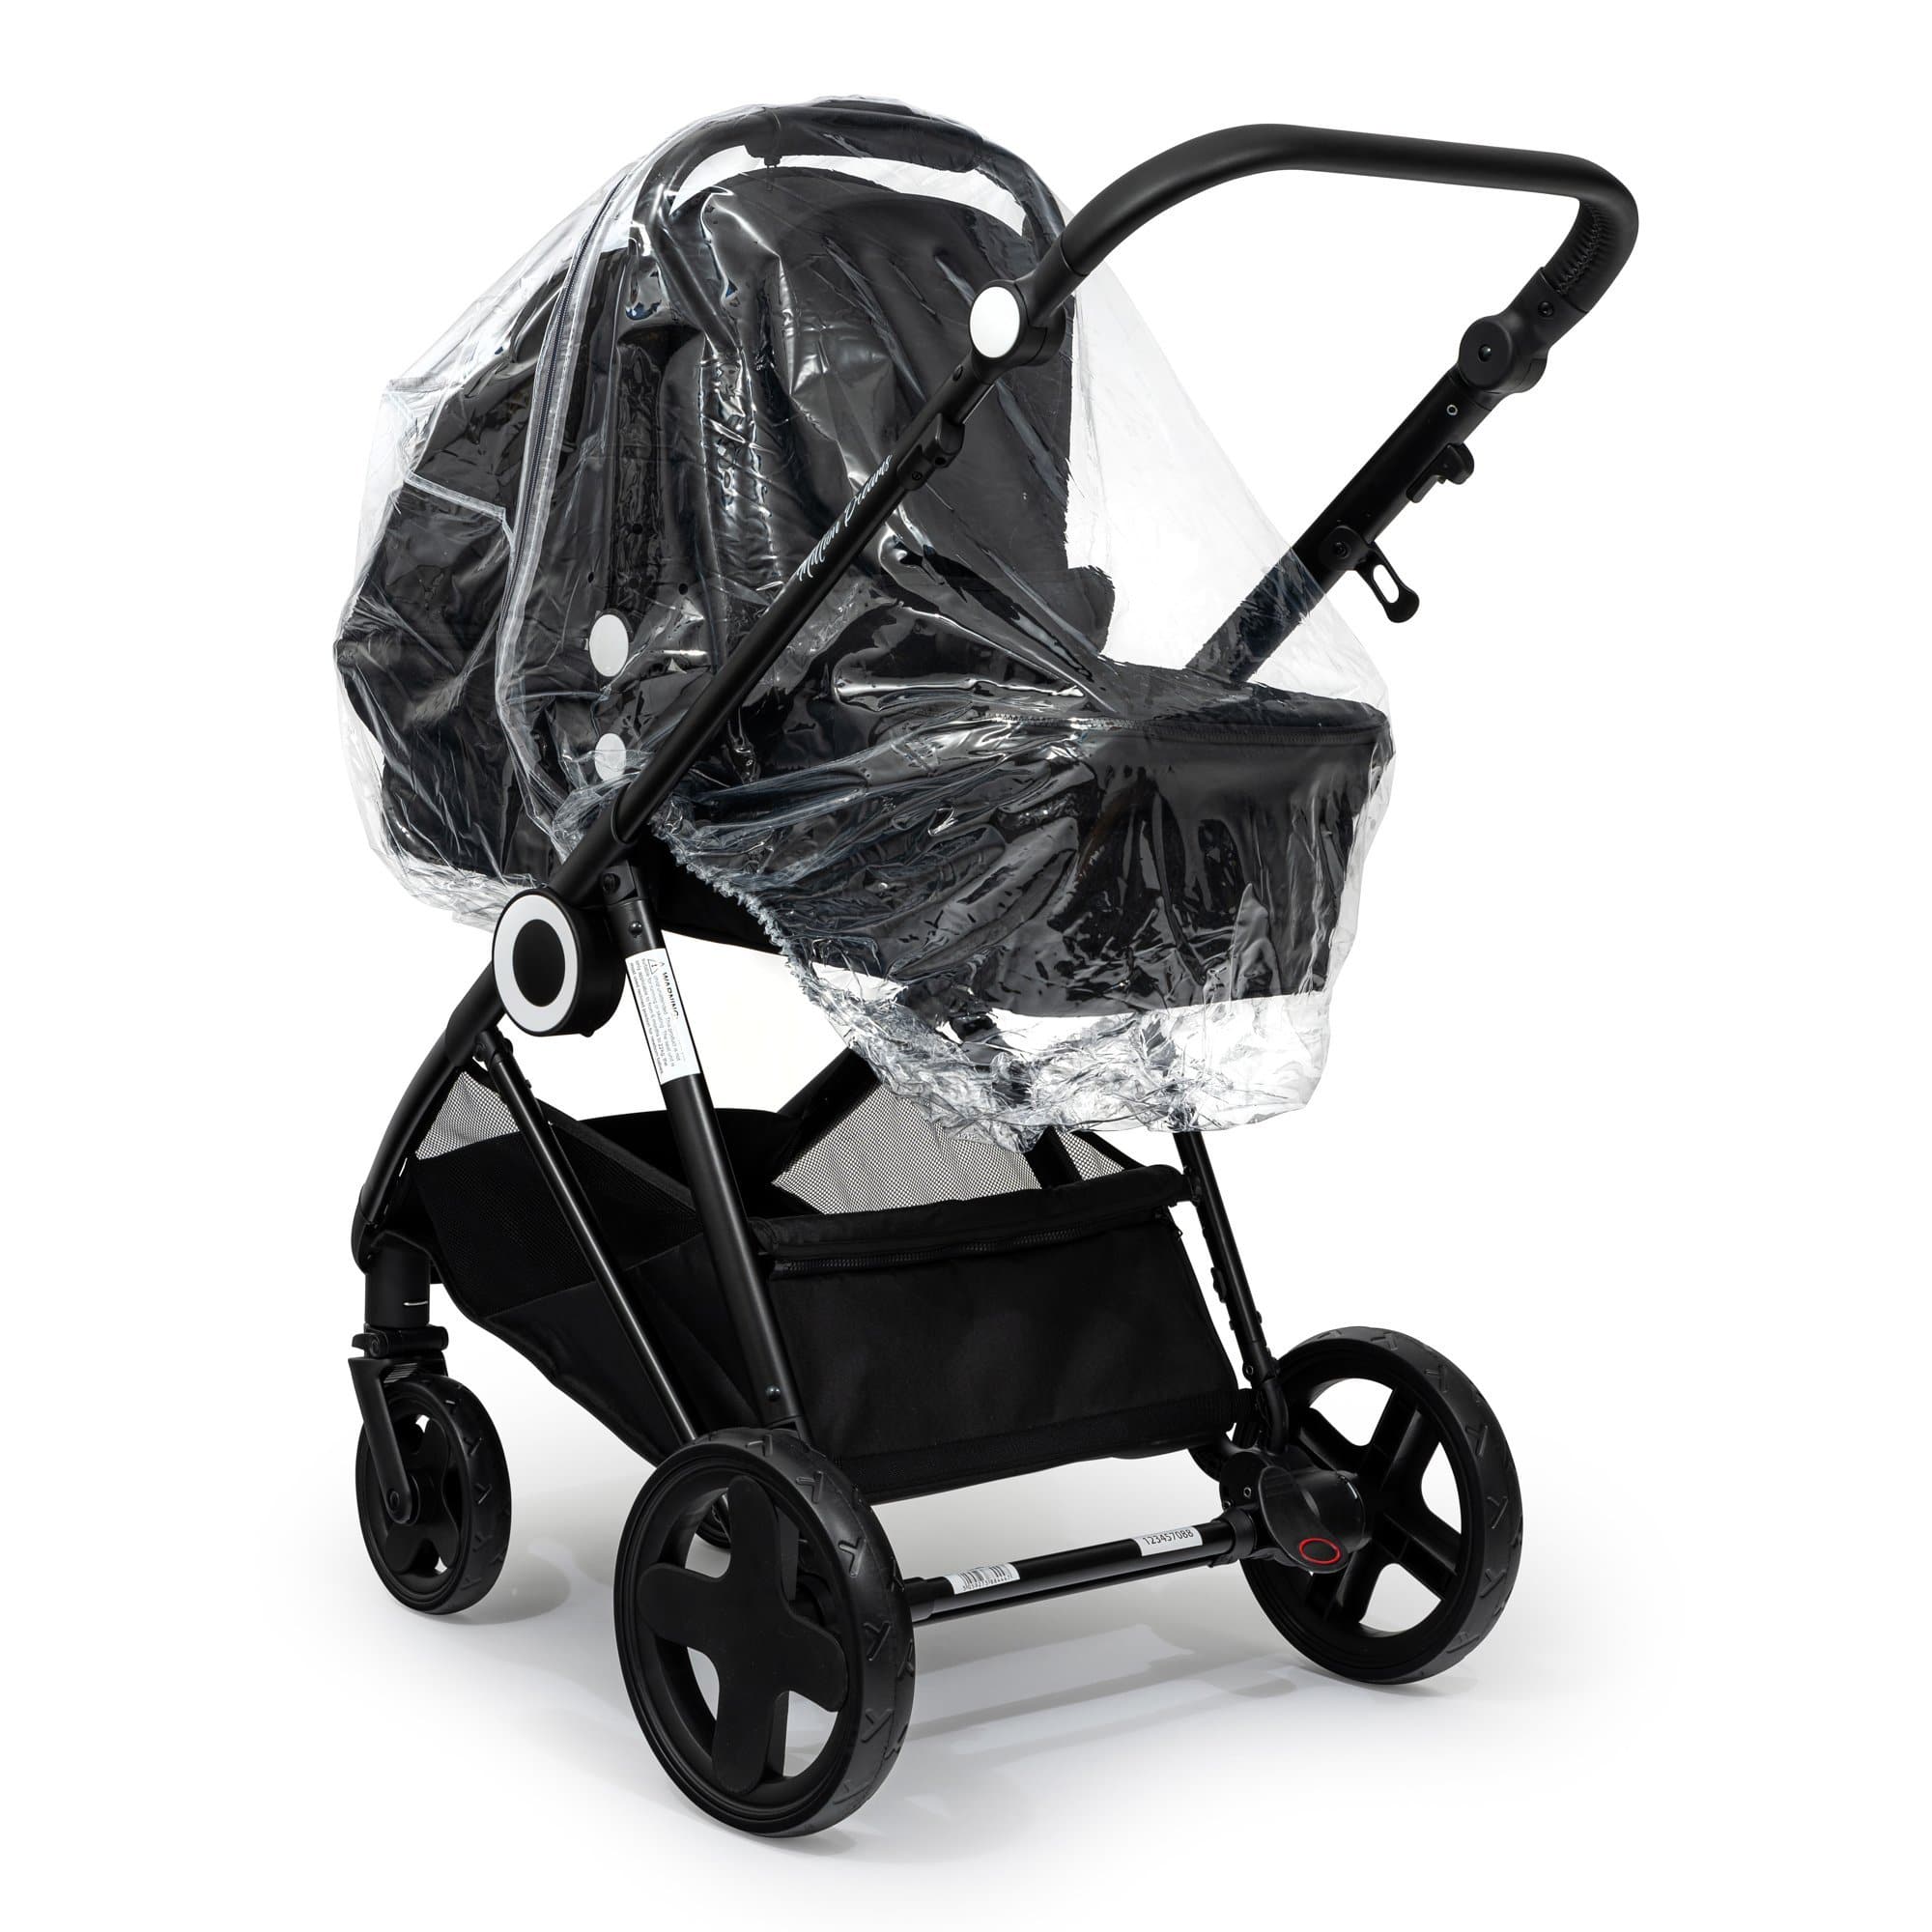 2 in 1 Rain Cover Compatible with Baby Jogger - Fits All Models - For Your Little One